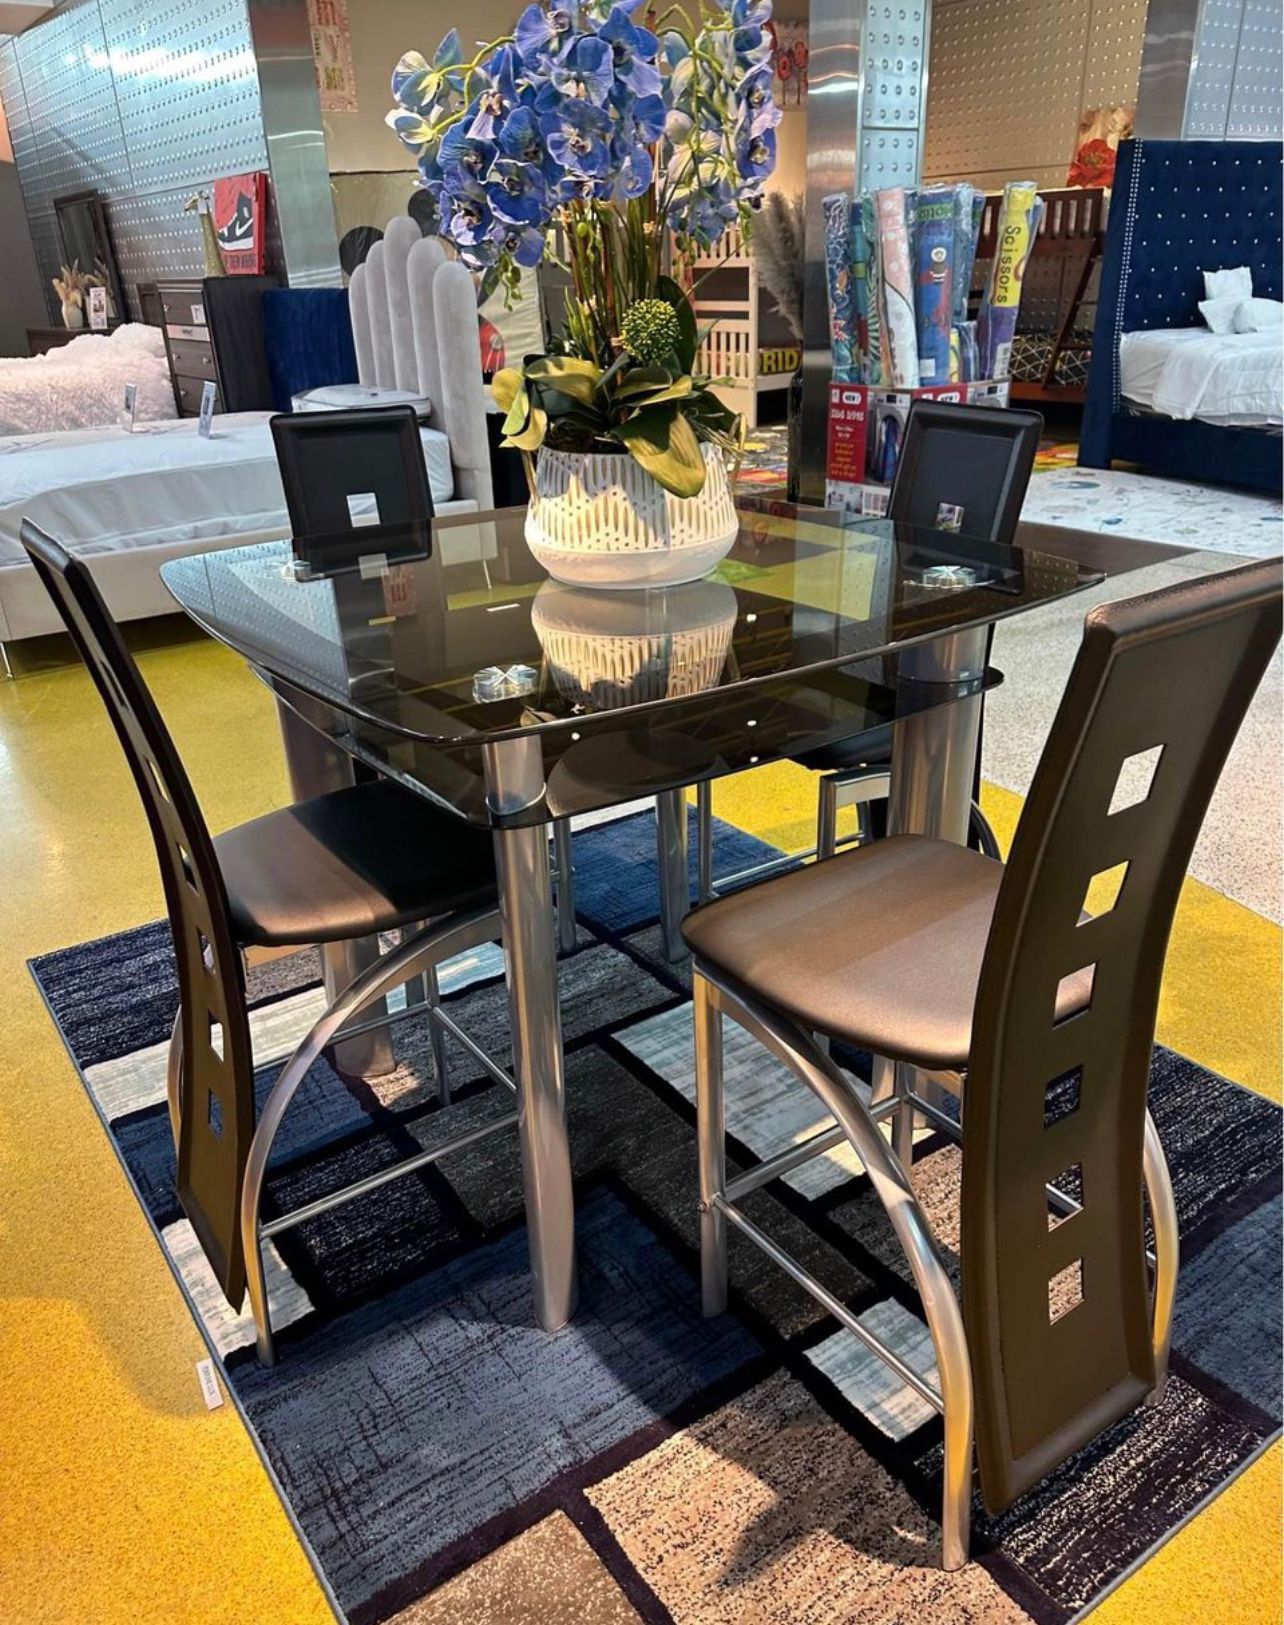 Brand new Dining set in box- Shop now pay later $49 down🔥Free Delivery🔥 